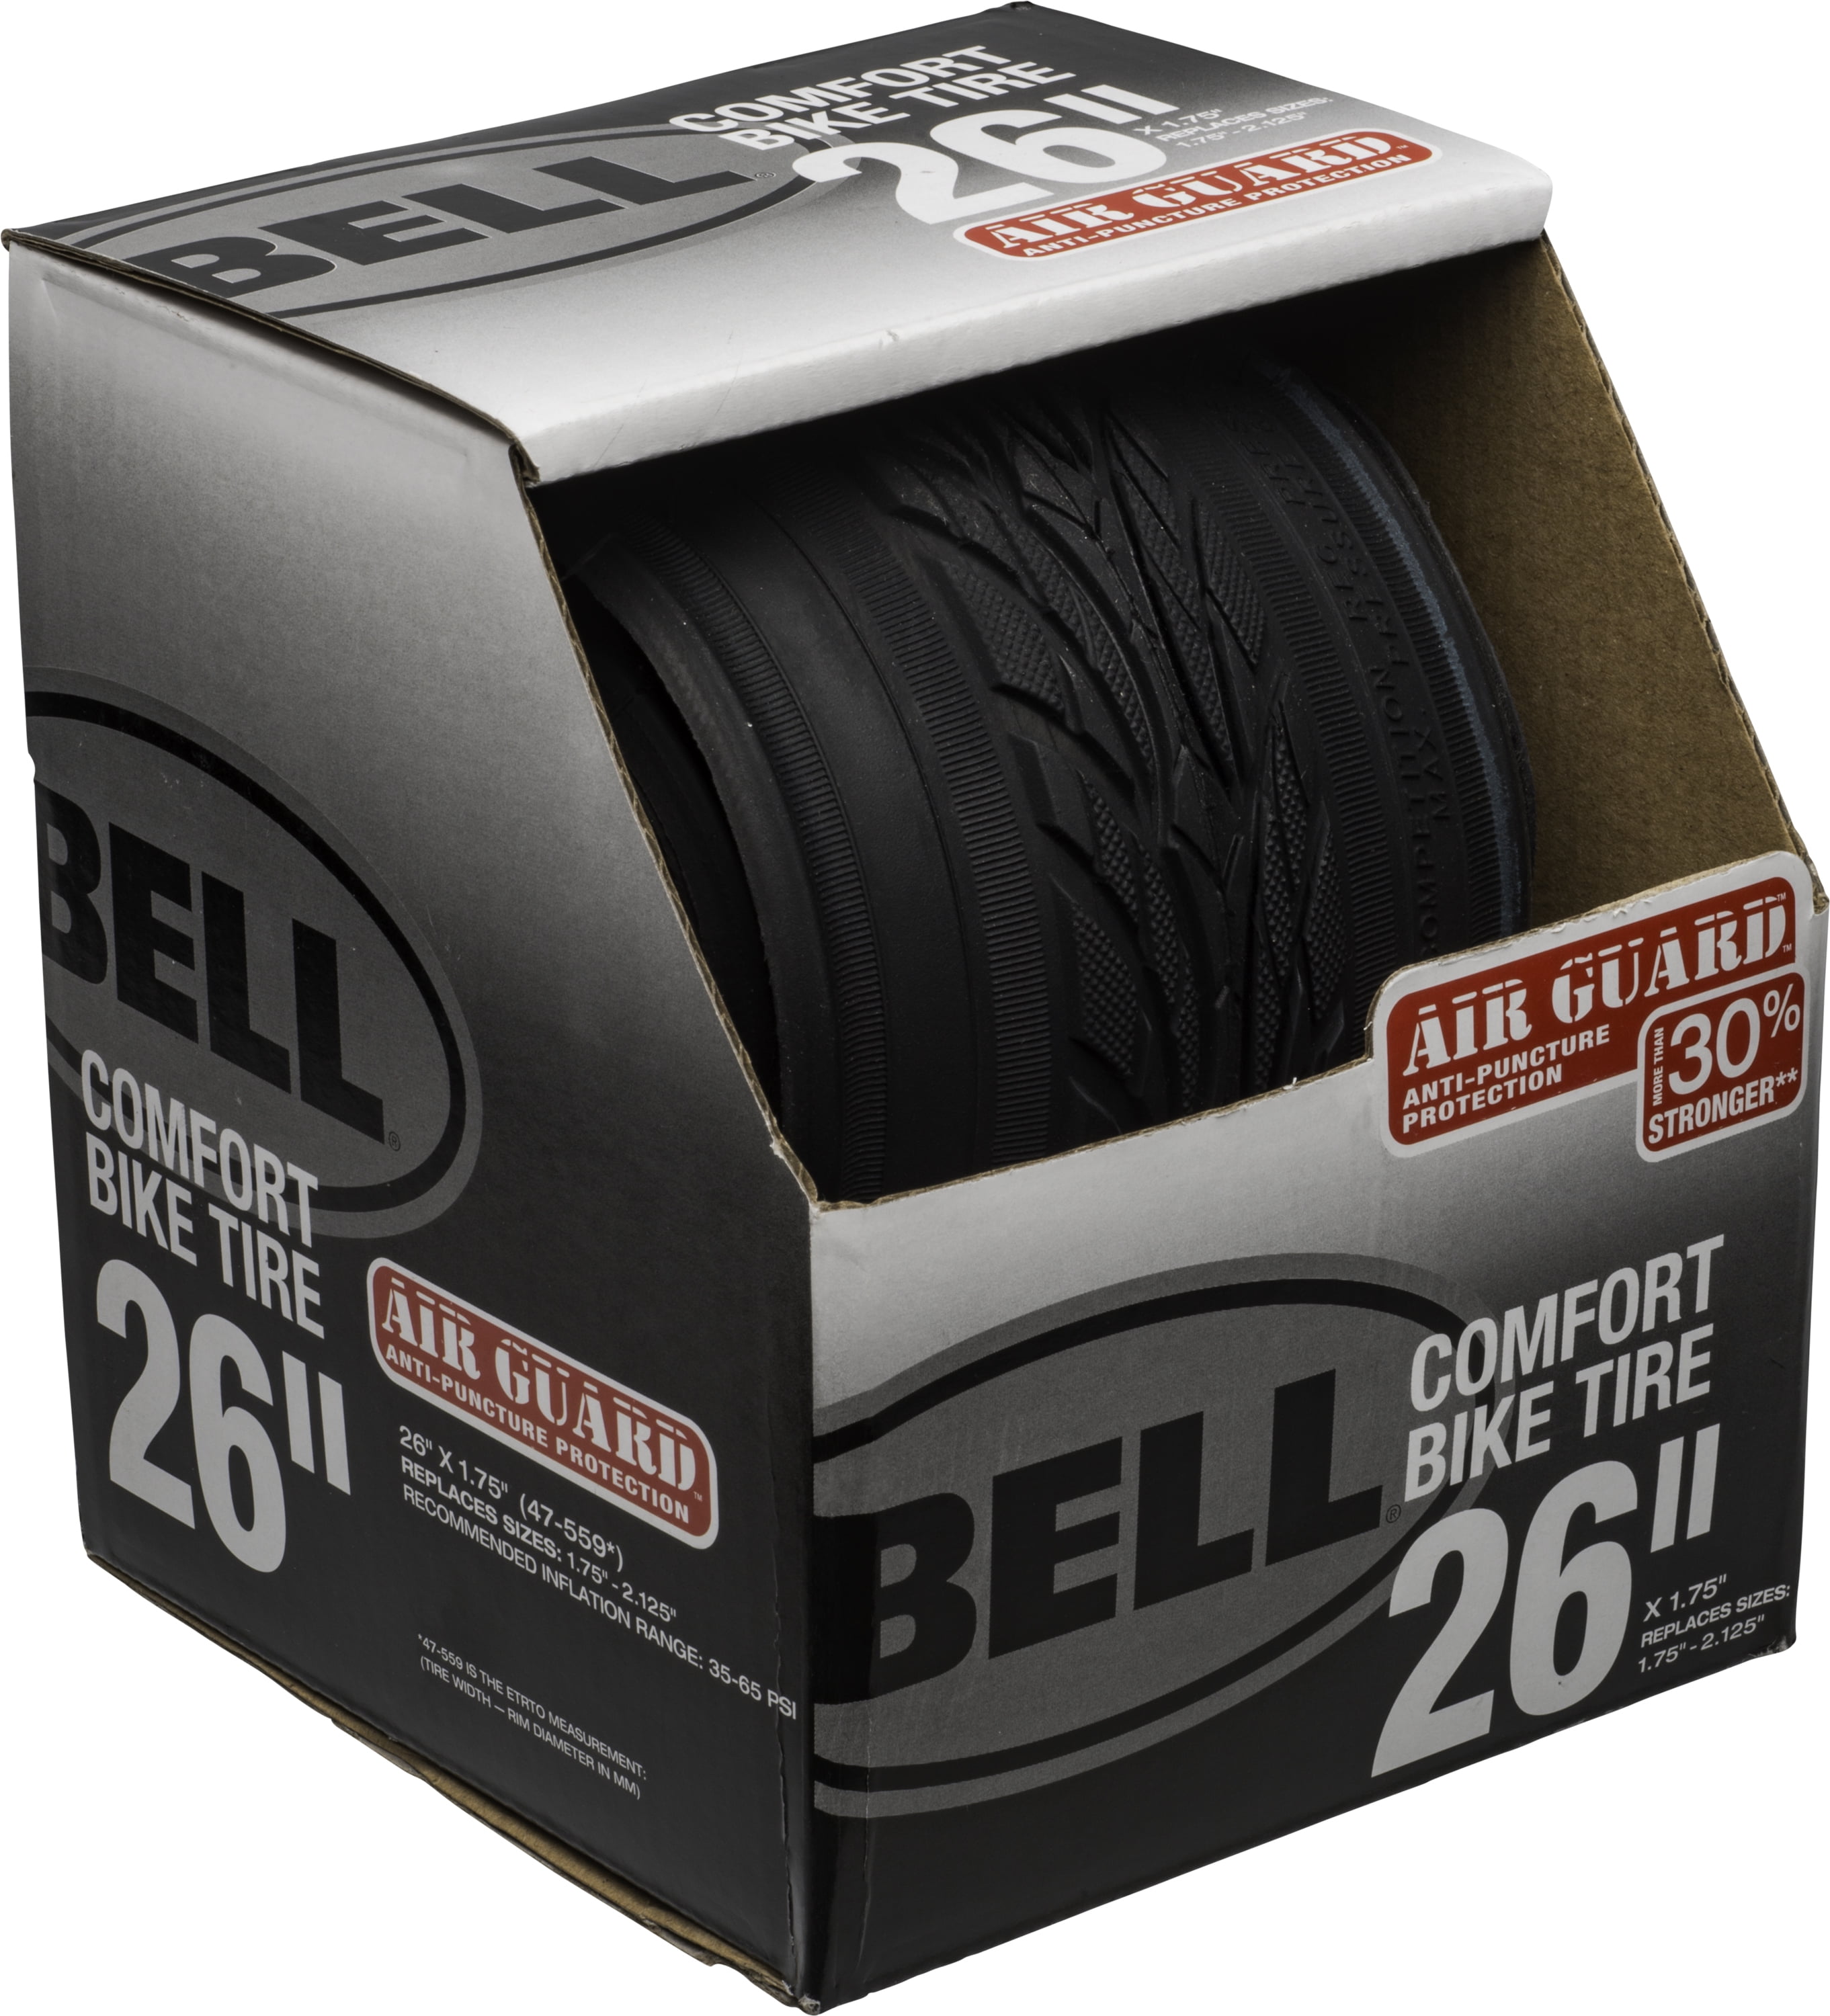 Bell Air Guard Comfort 26" Bike Tire 7115435 for sale online 